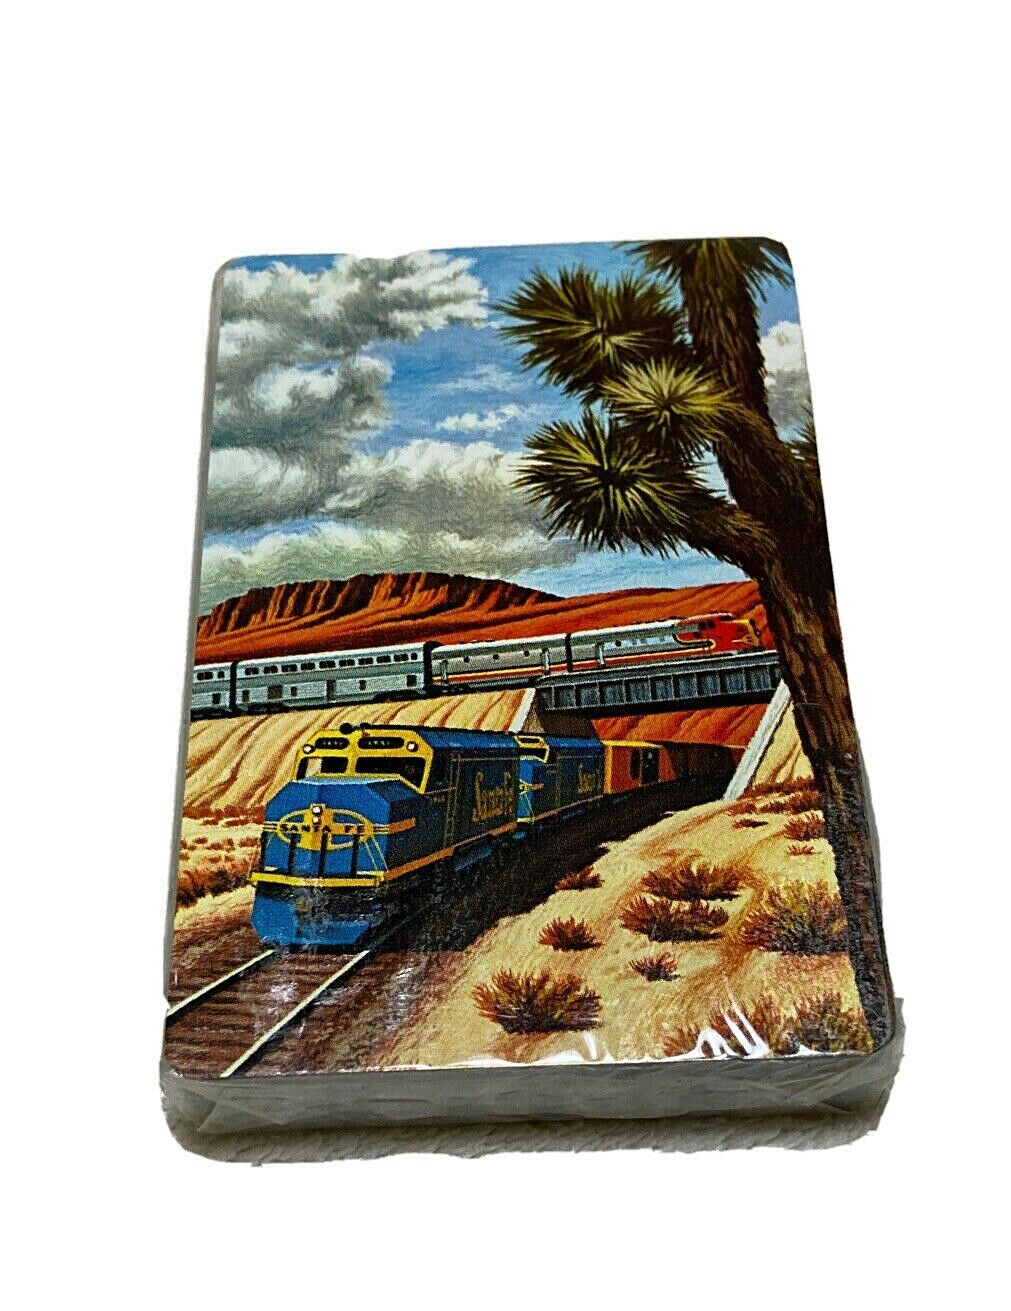 vintage Santa Fe trains new sealed playing cards plastic coated with Nu-Vue tint